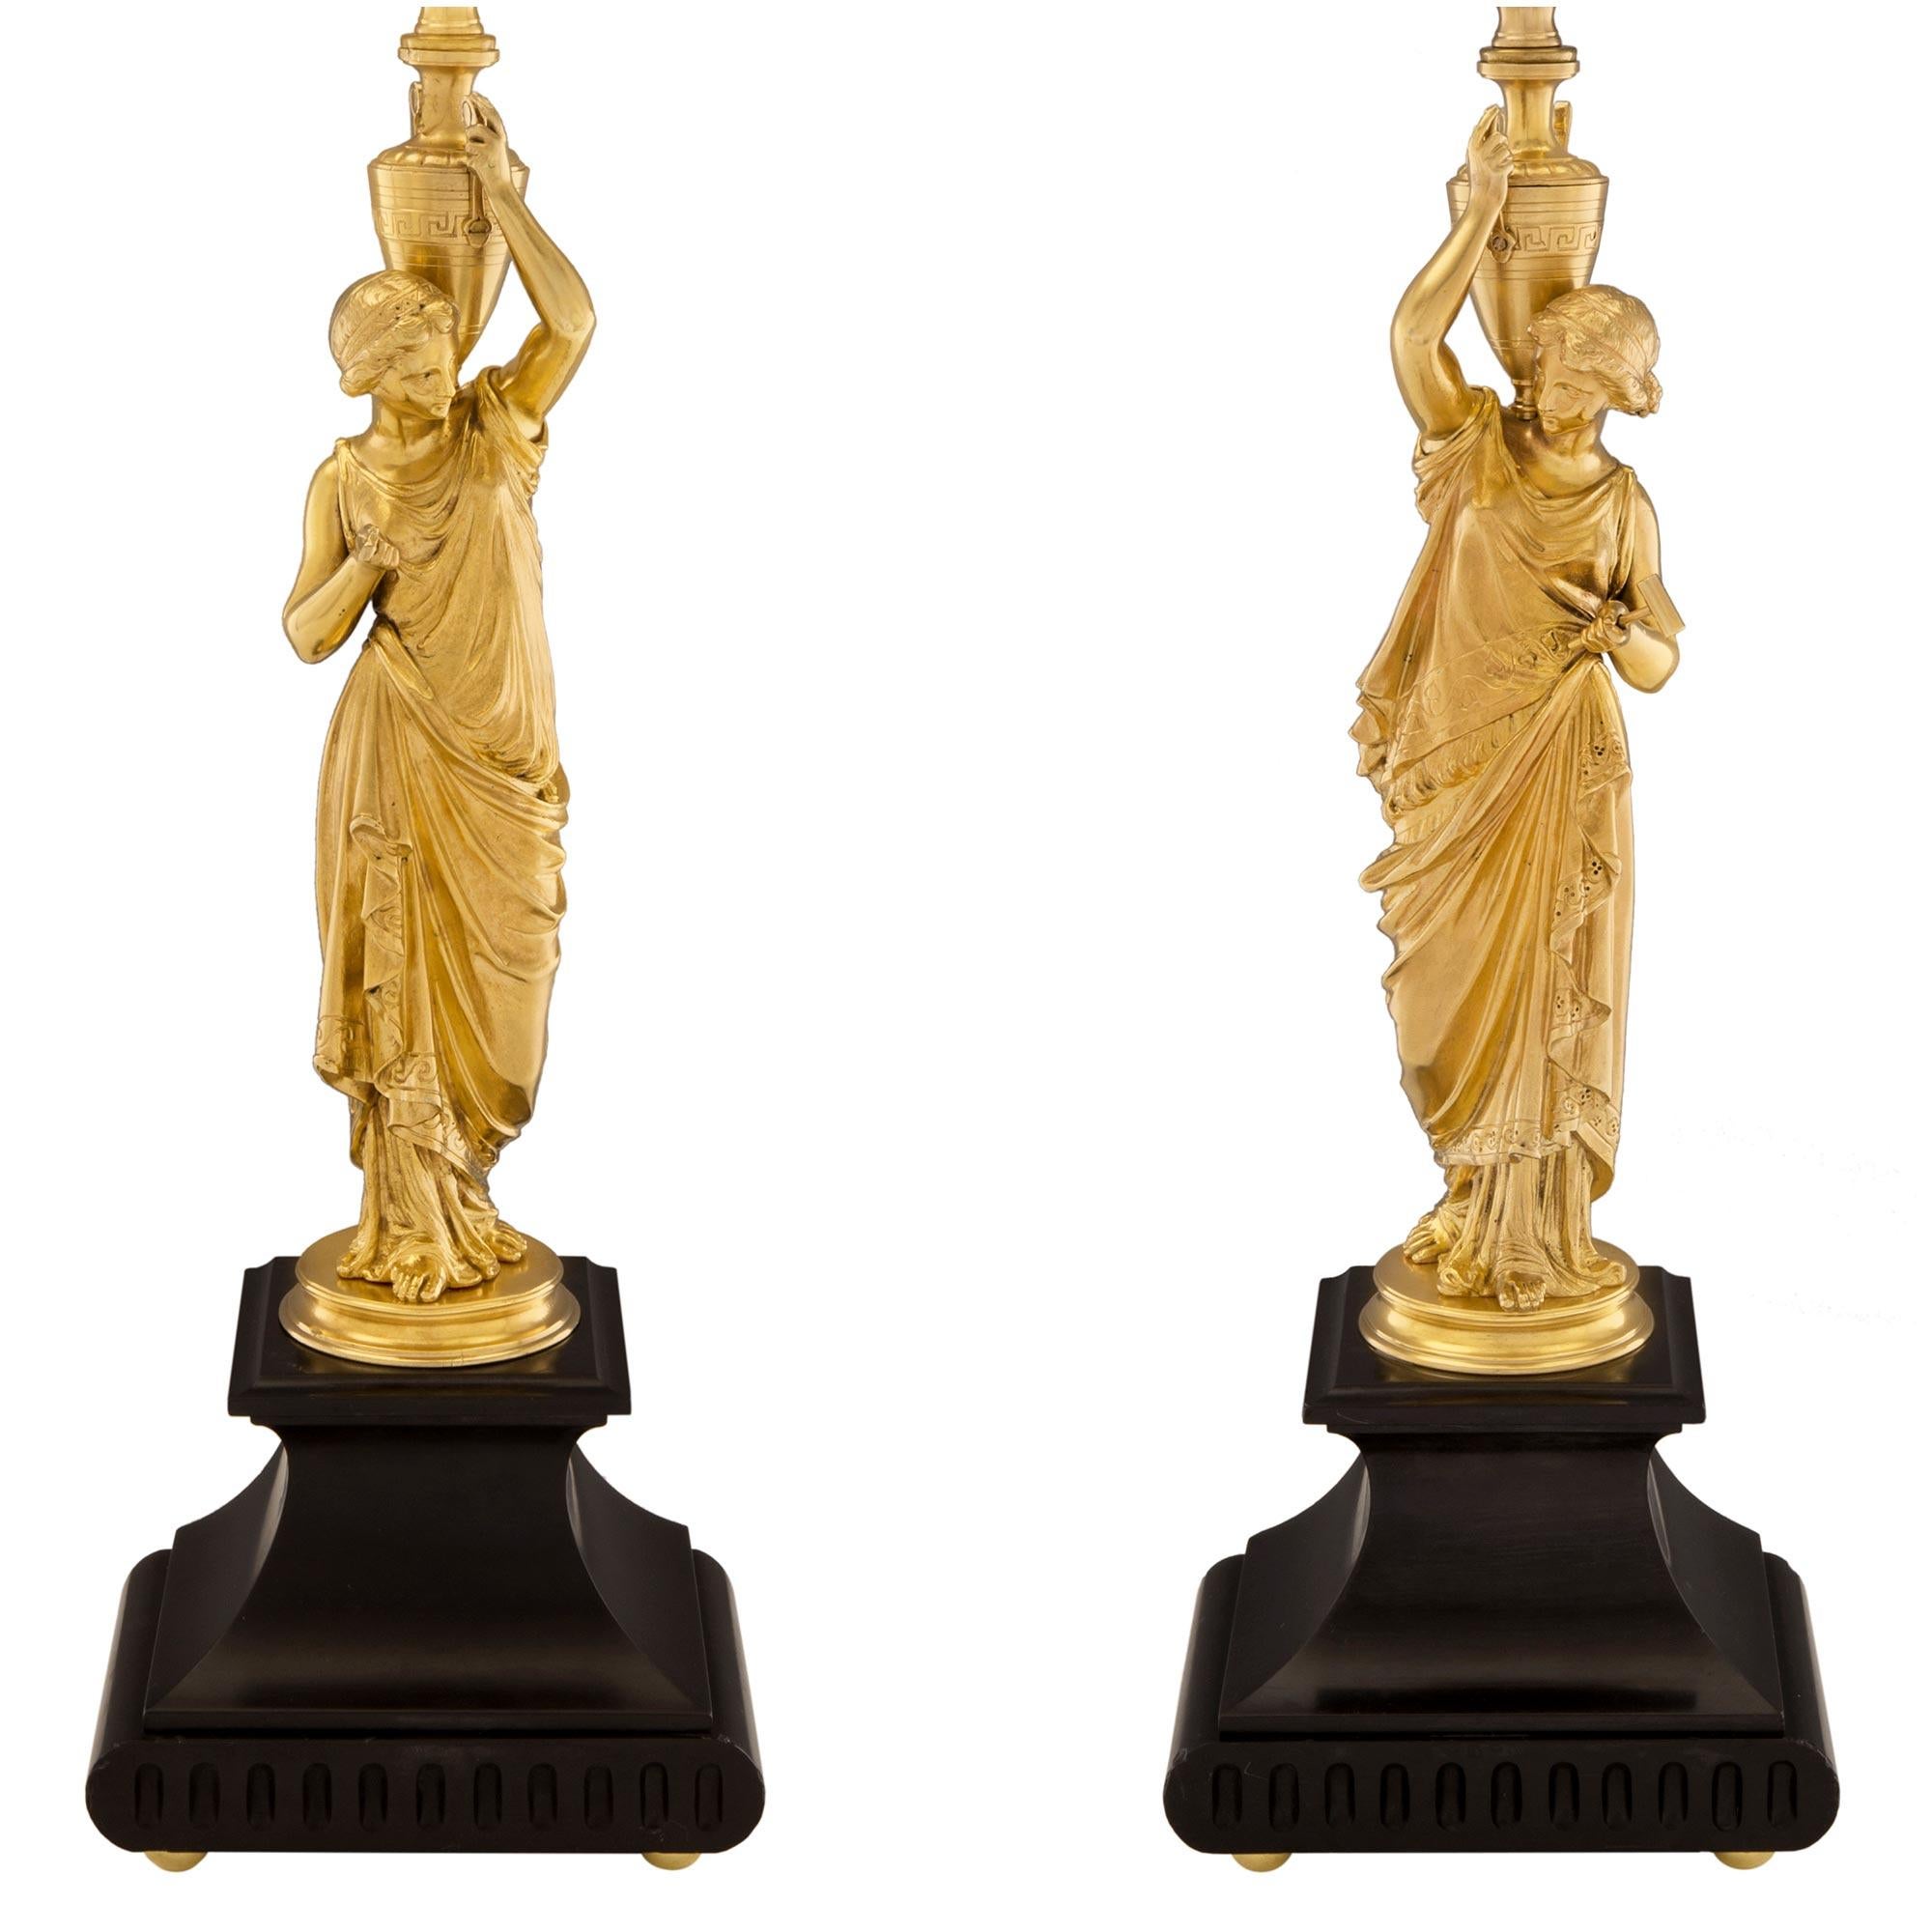 A most elegant and high quality true pair of French 19th century neoclassical St. ormolu and black Belgian marble lamps. Each lamp is raised by a fine and most decorative black Belgian marble base with fine ormolu ball feet, fluted patterns and